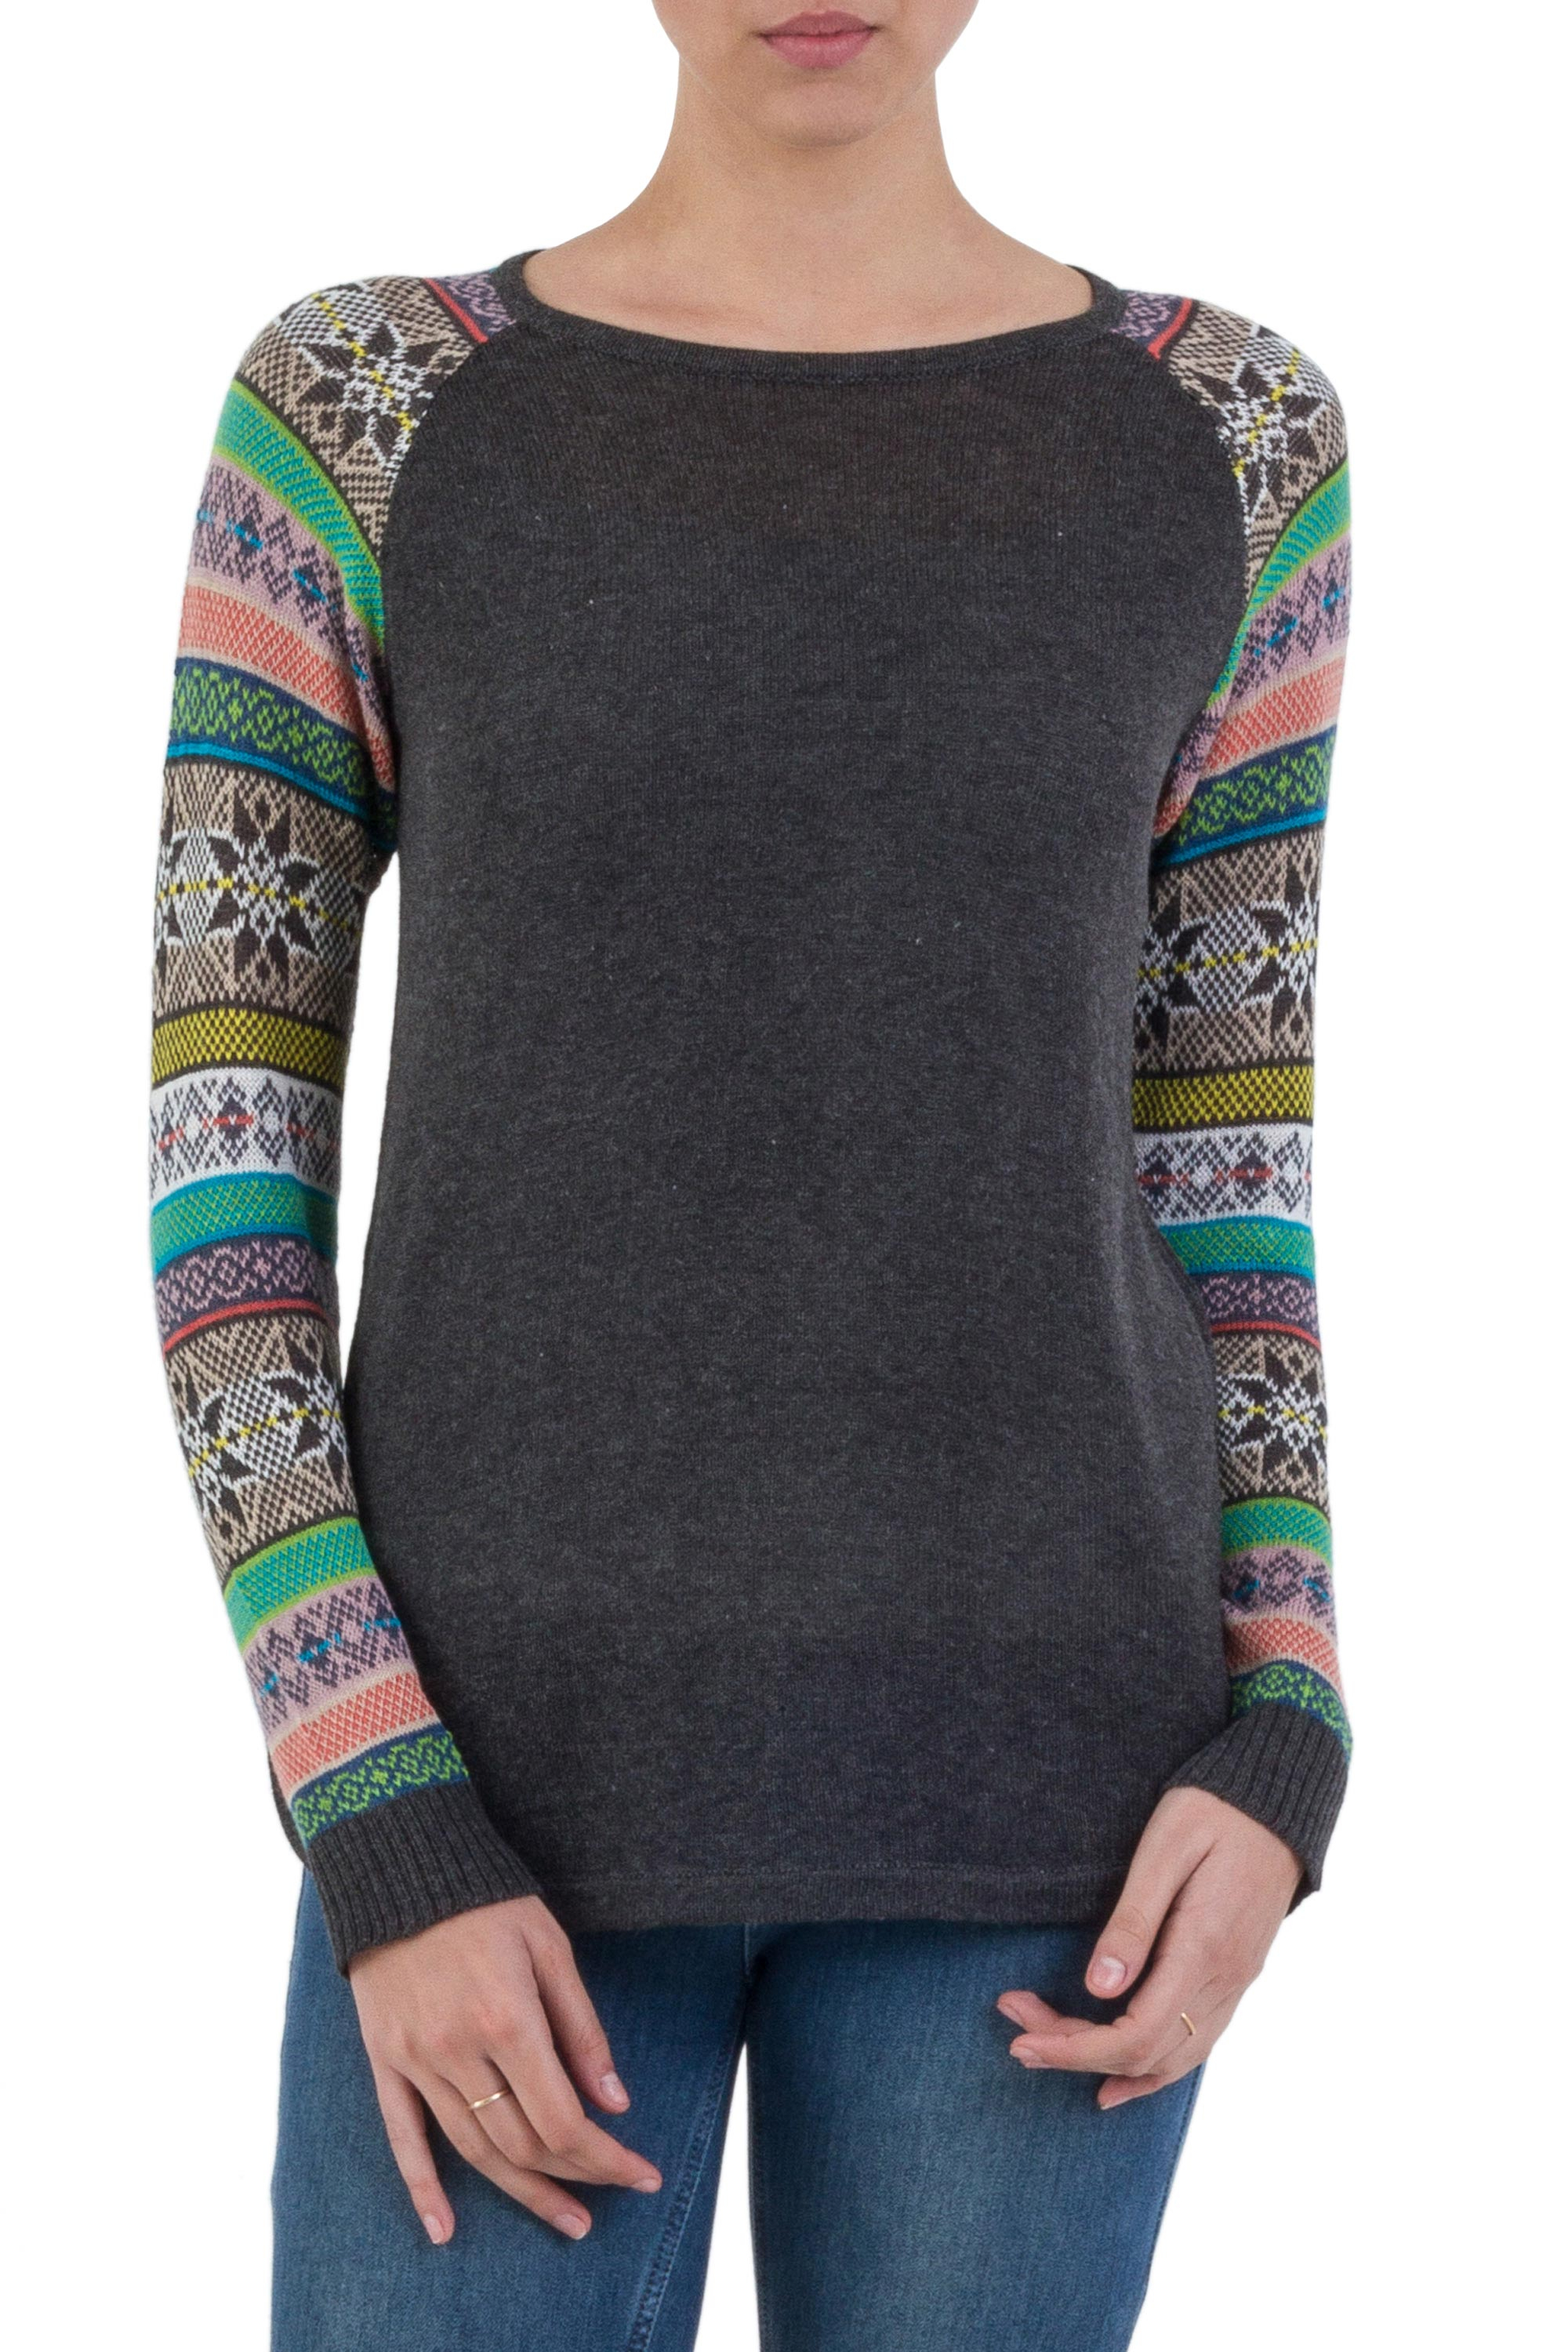 Dark Grey Long Sweater with Star Pattern Multicolor Sleeves - Andean ...